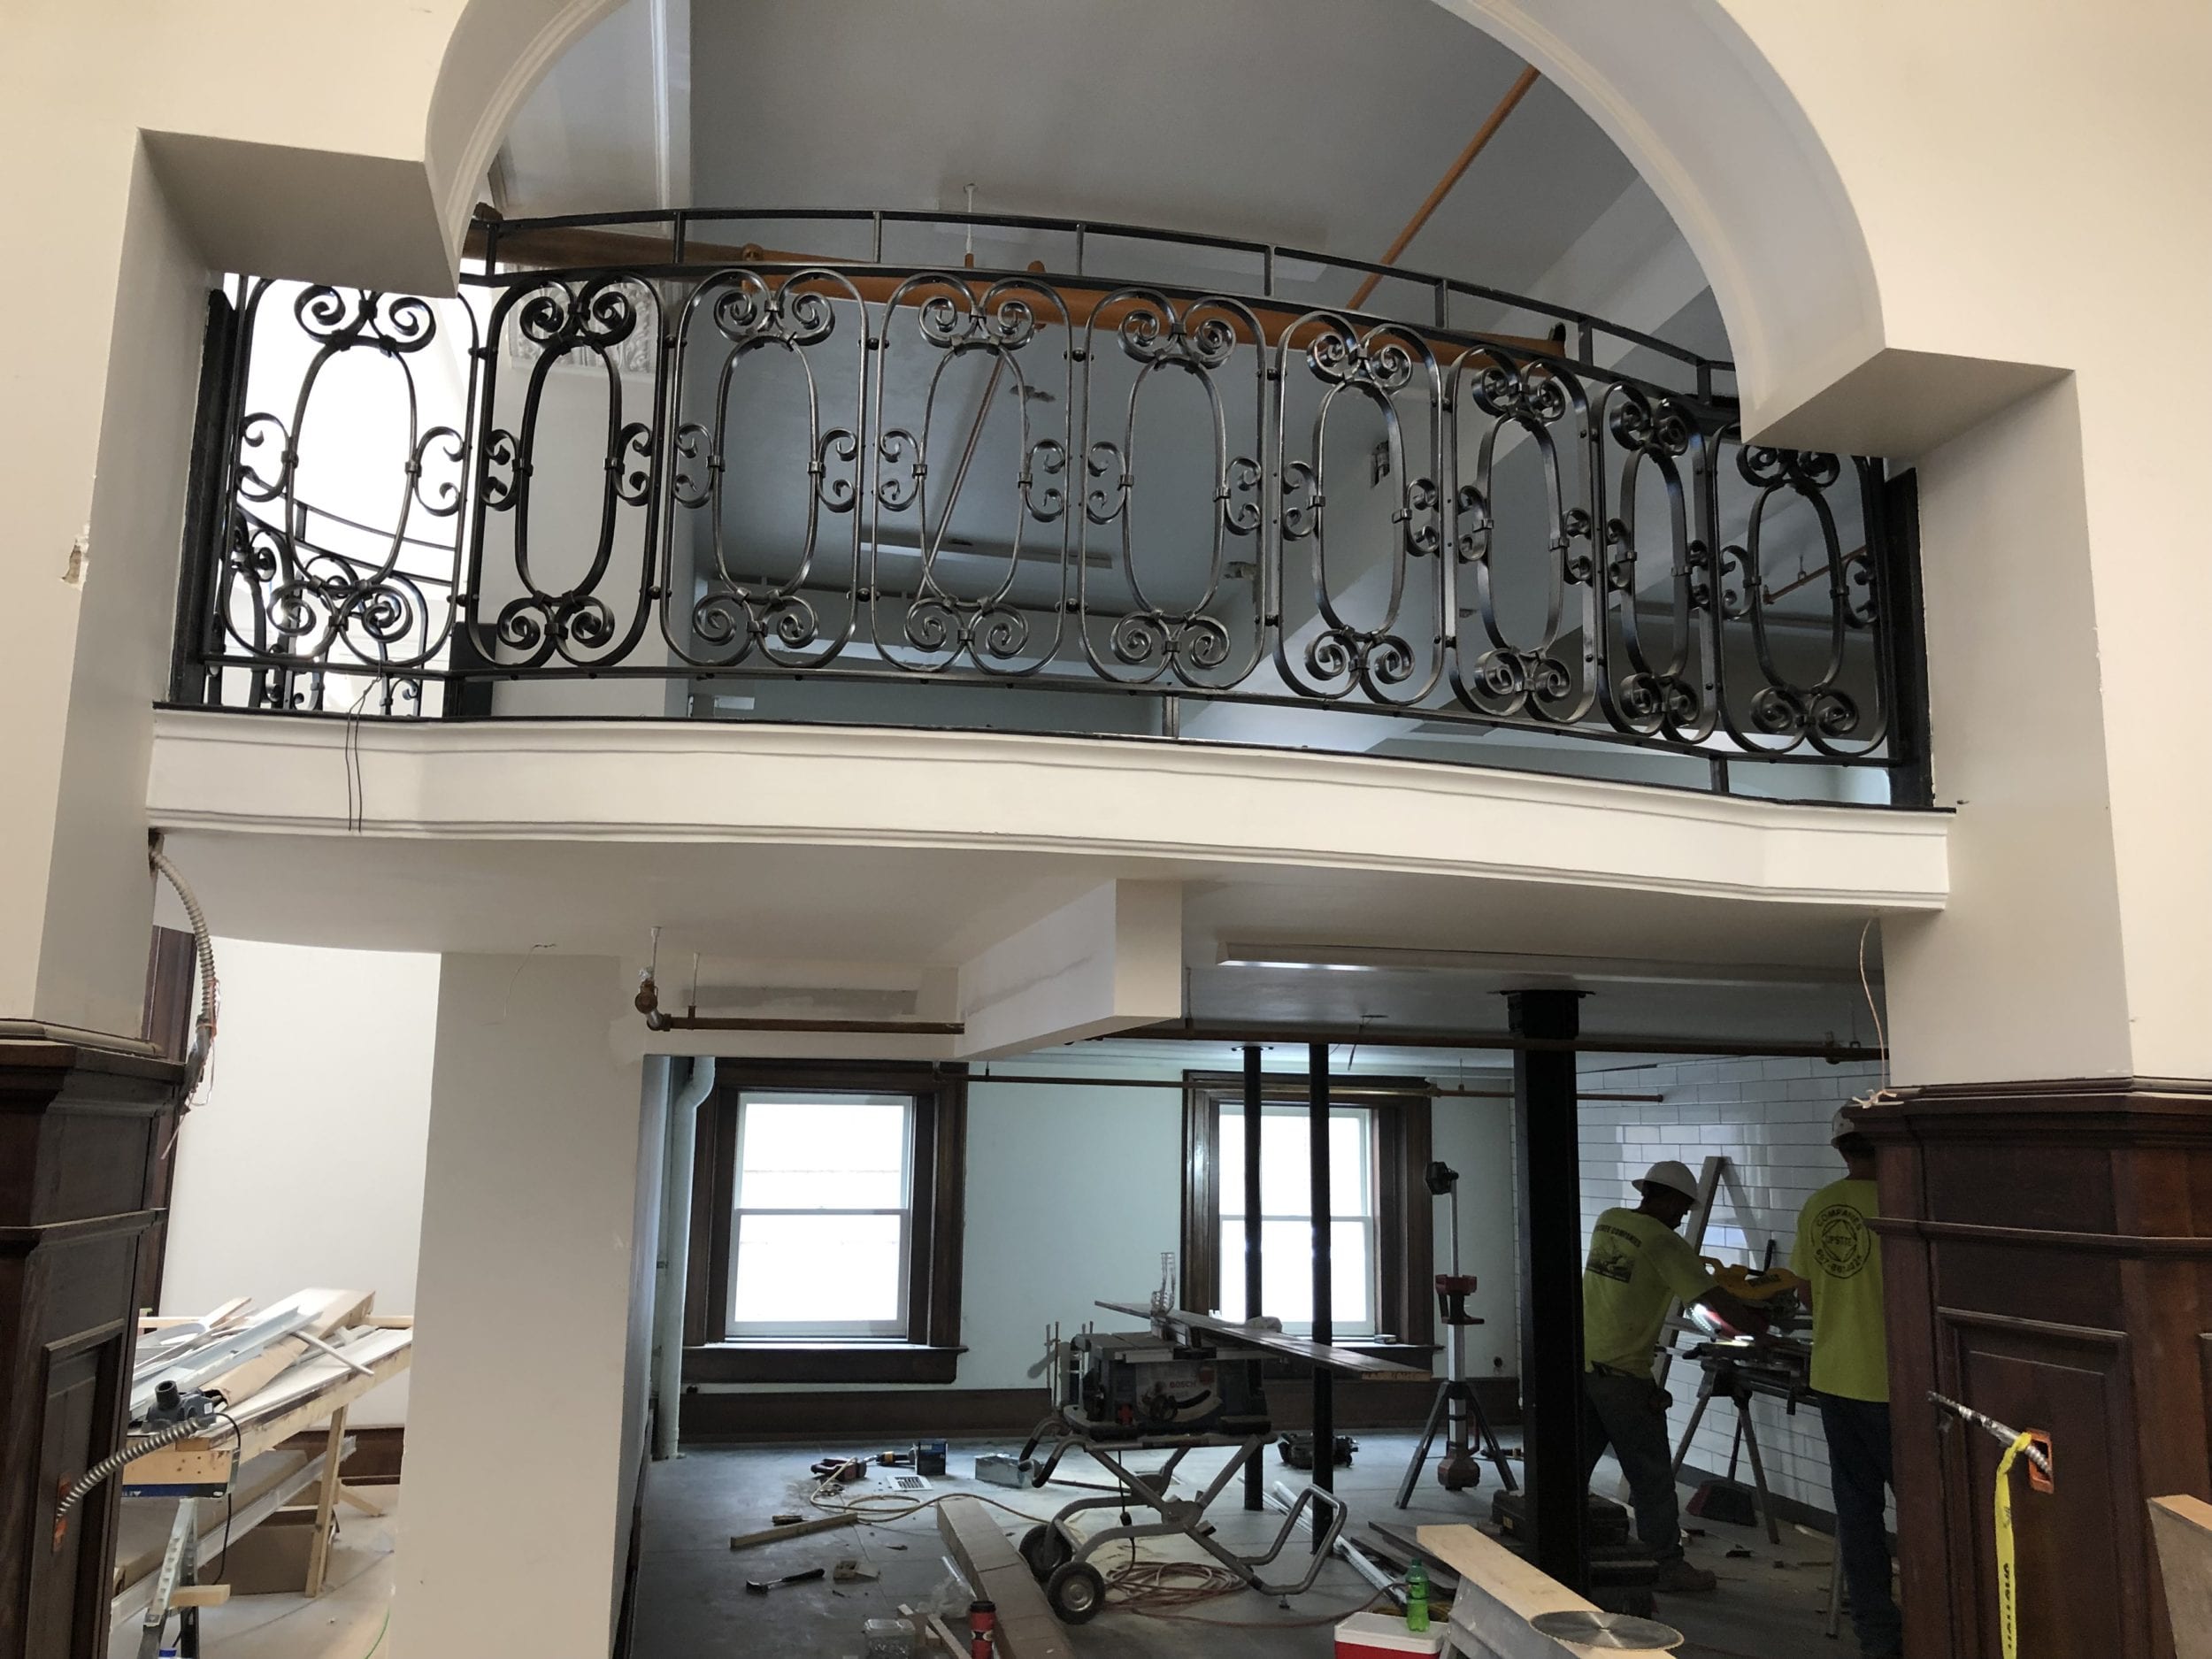 The new Culinary & Event Center includes many historic touches, such as these iron railings.